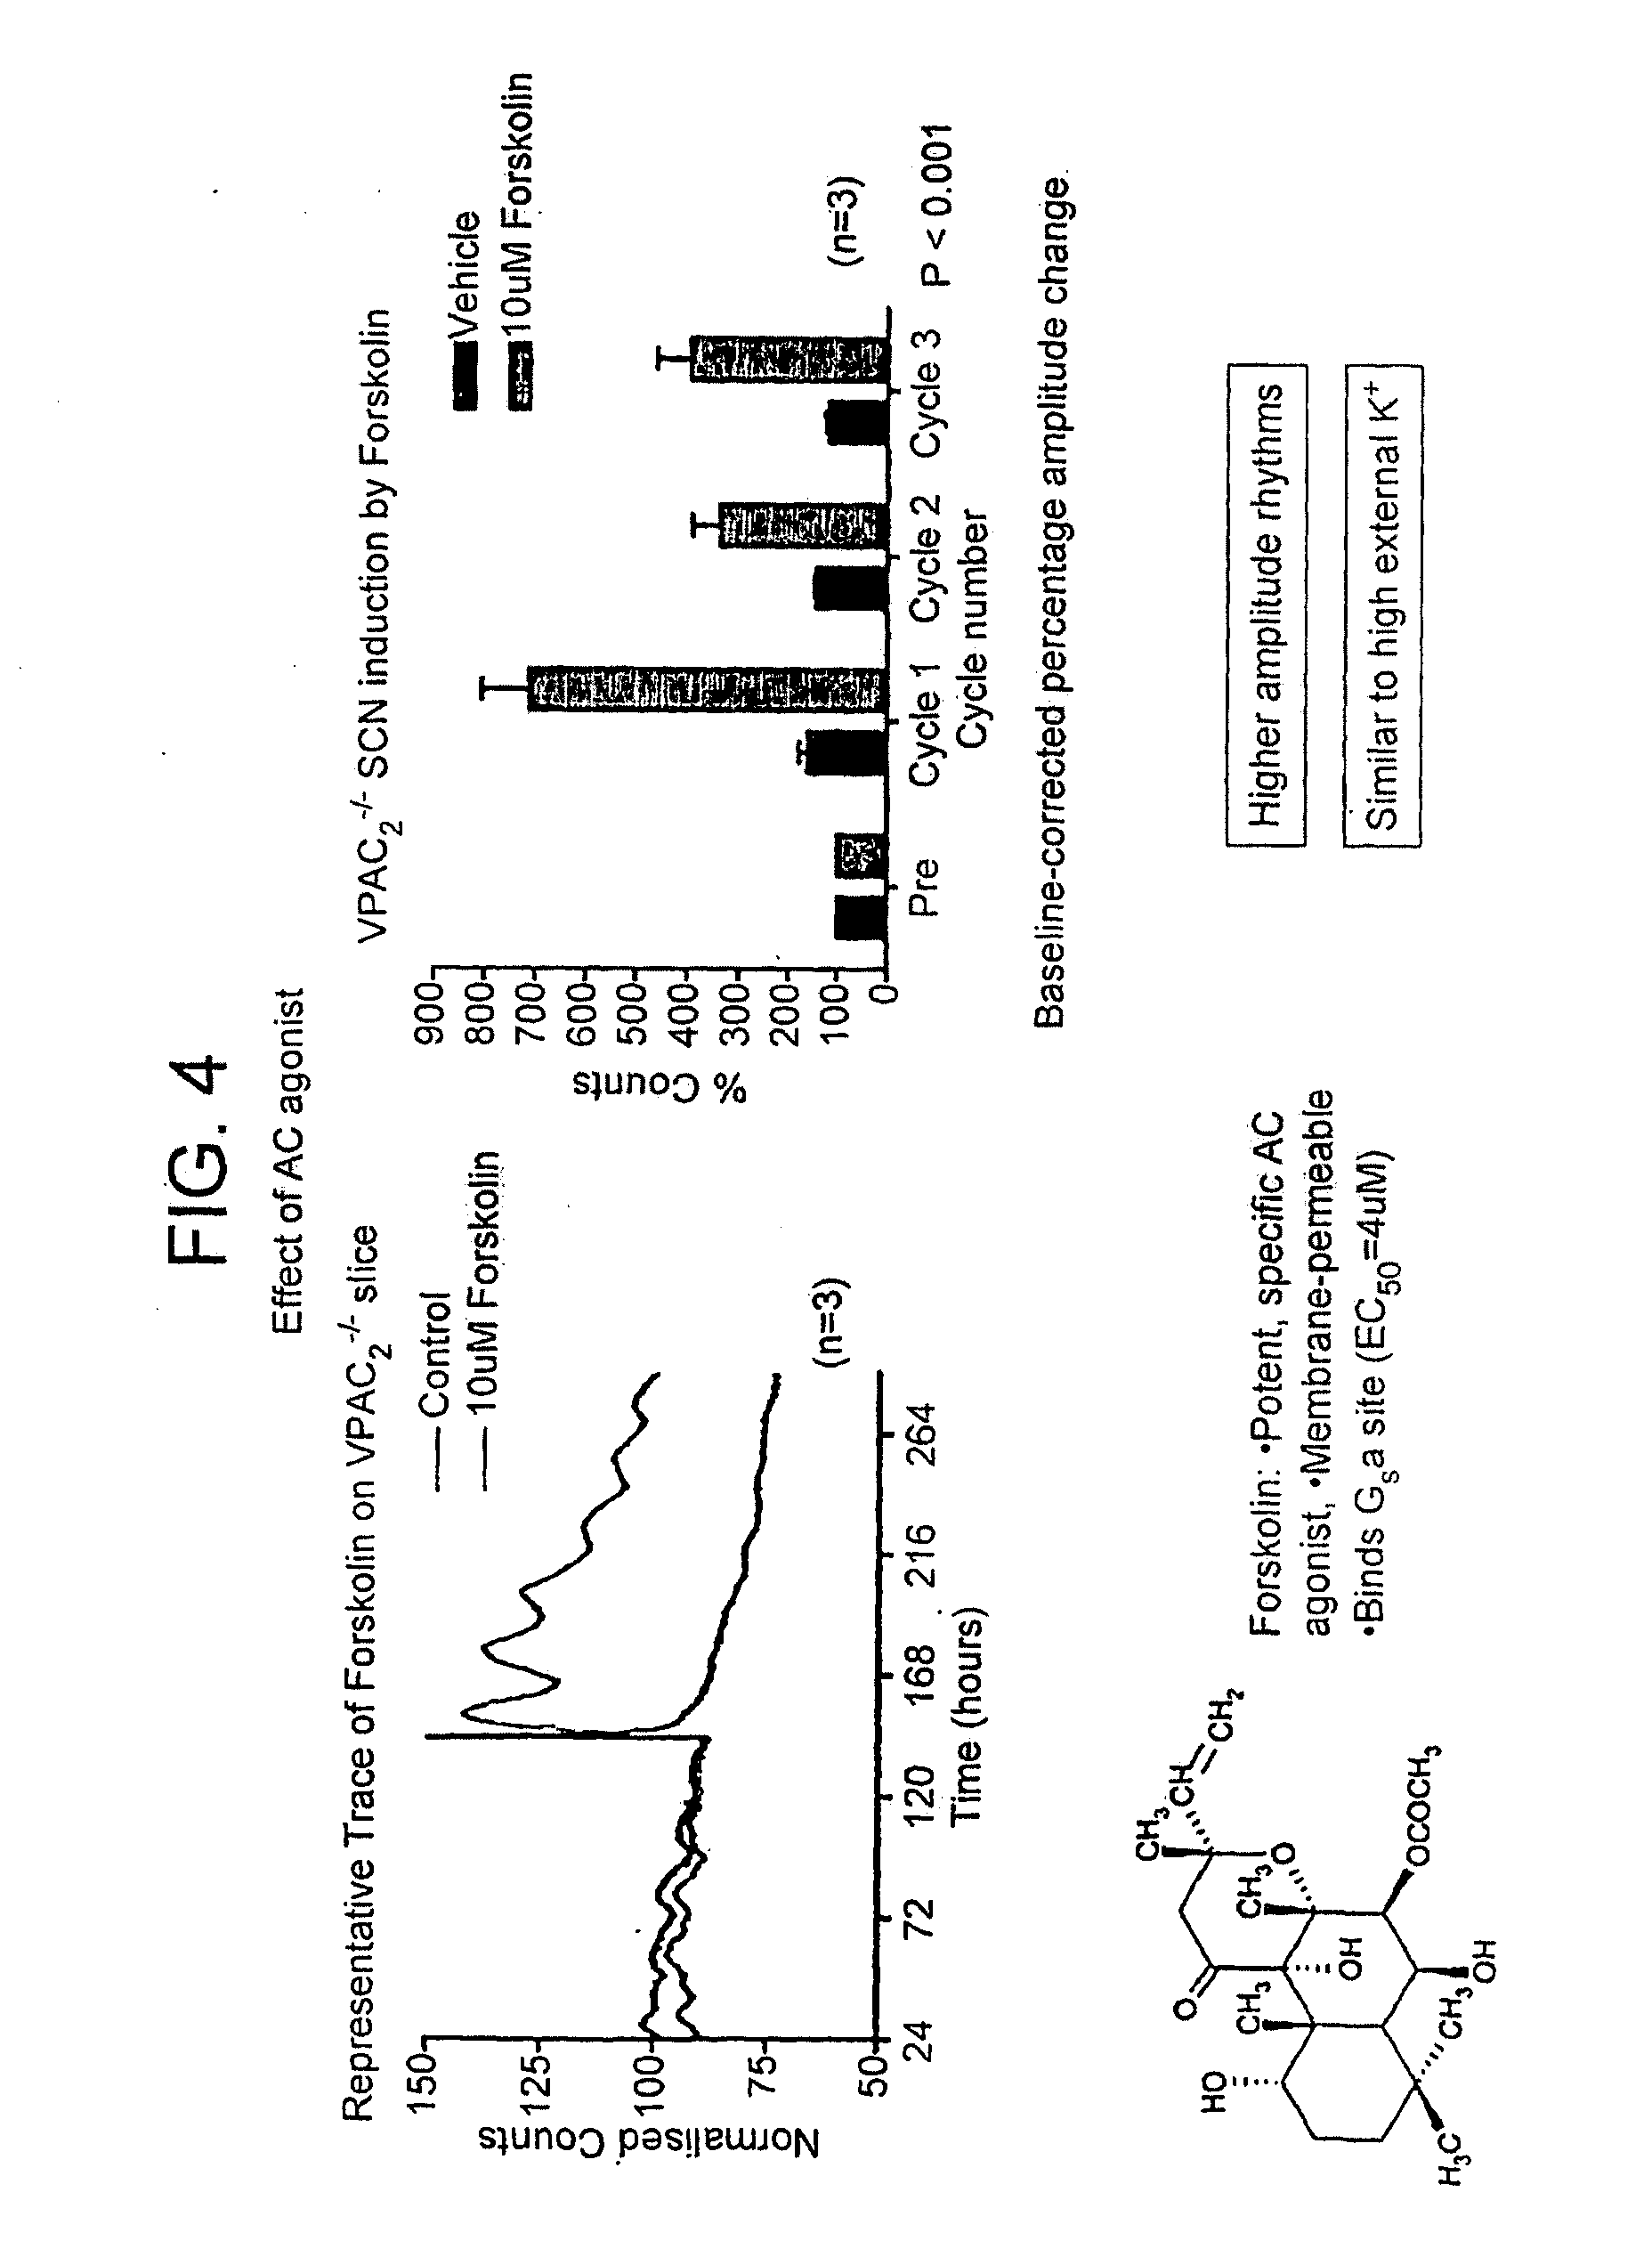 Inhibitor of Adenylyl Cyclase for Treating a Disorder of the Circadian Rhythm